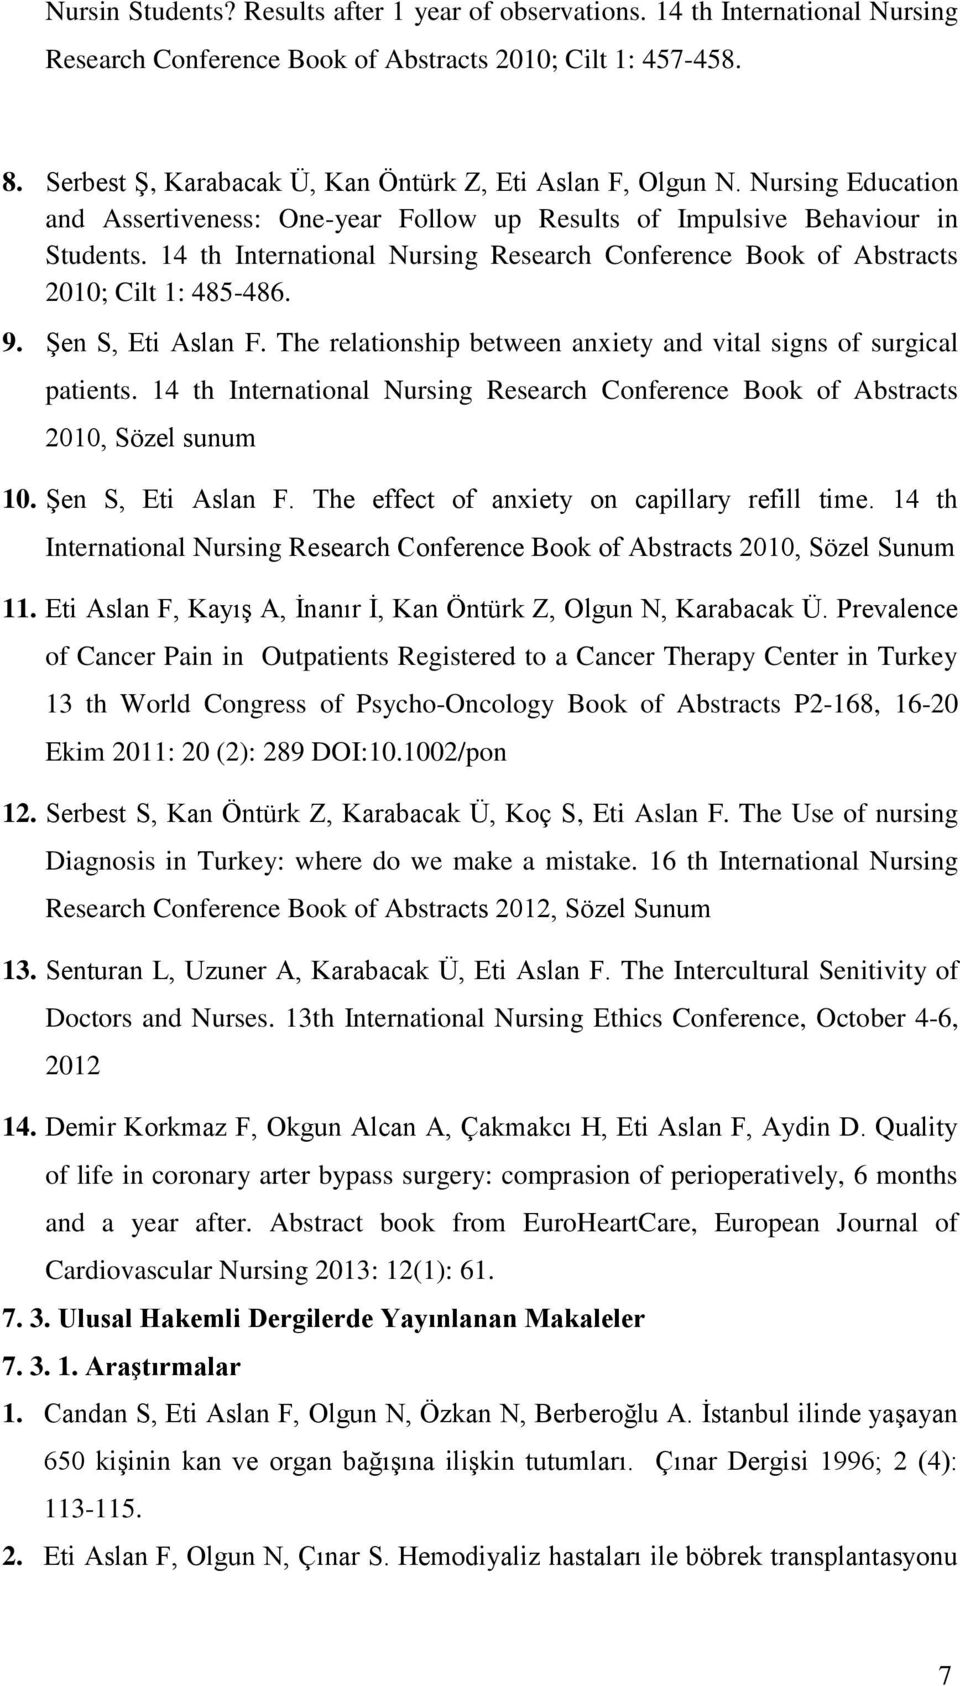 14 th International Nursing Research Conference Book of Abstracts 2010; Cilt 1: 485-486. 9. Şen S, Eti Aslan F. The relationship between anxiety and vital signs of surgical patients.